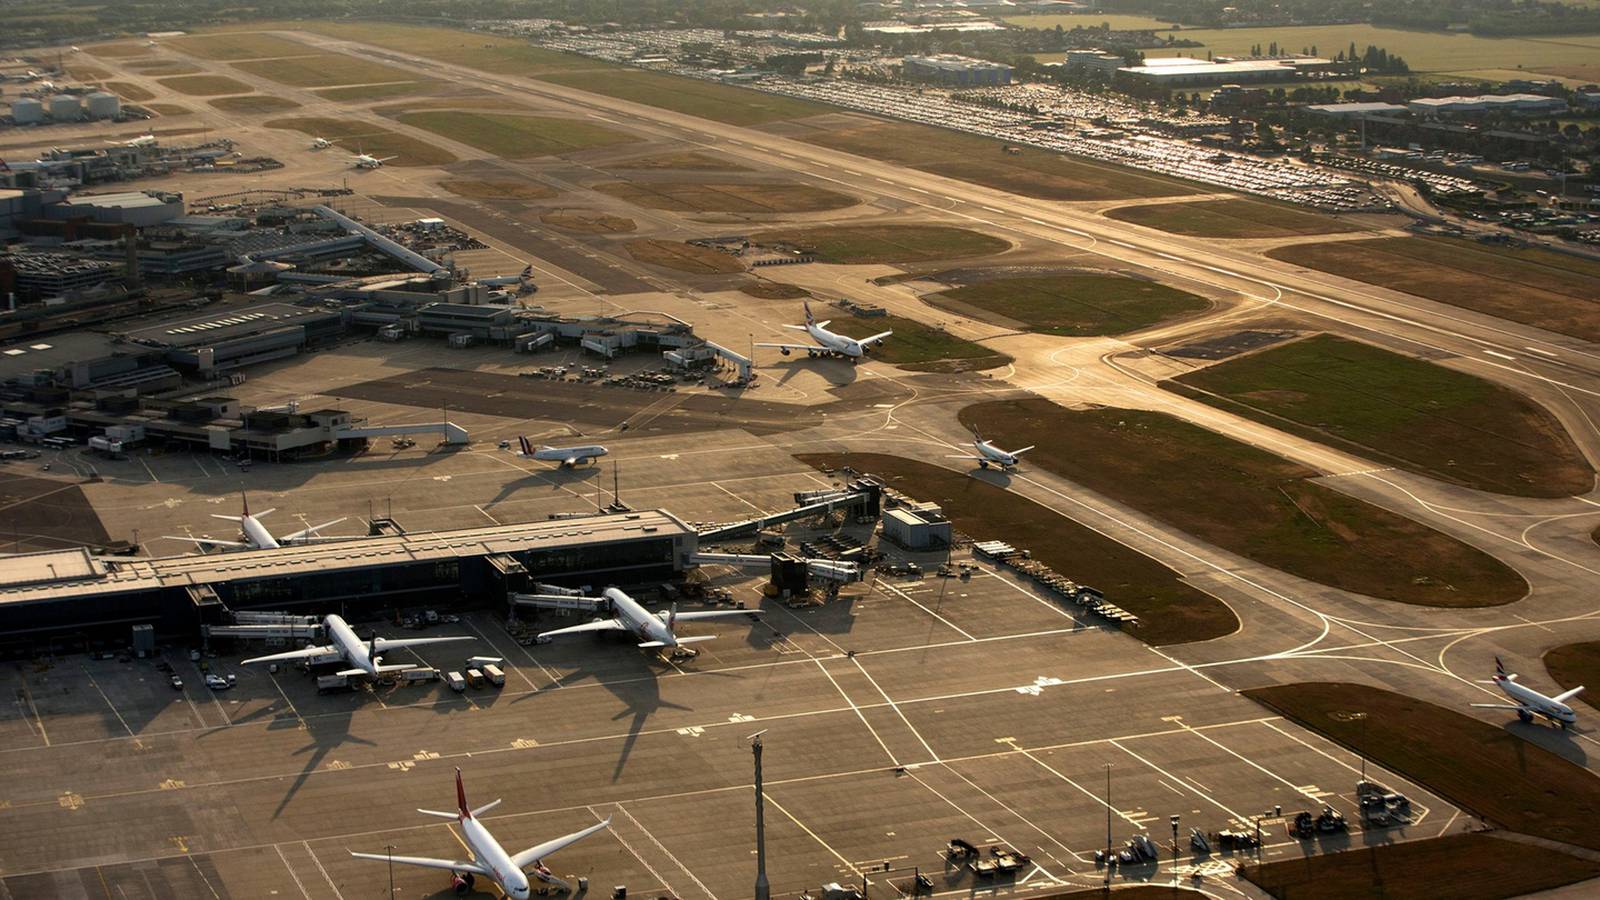 Heathrow Airport passenger numbers fall 81.5% in August